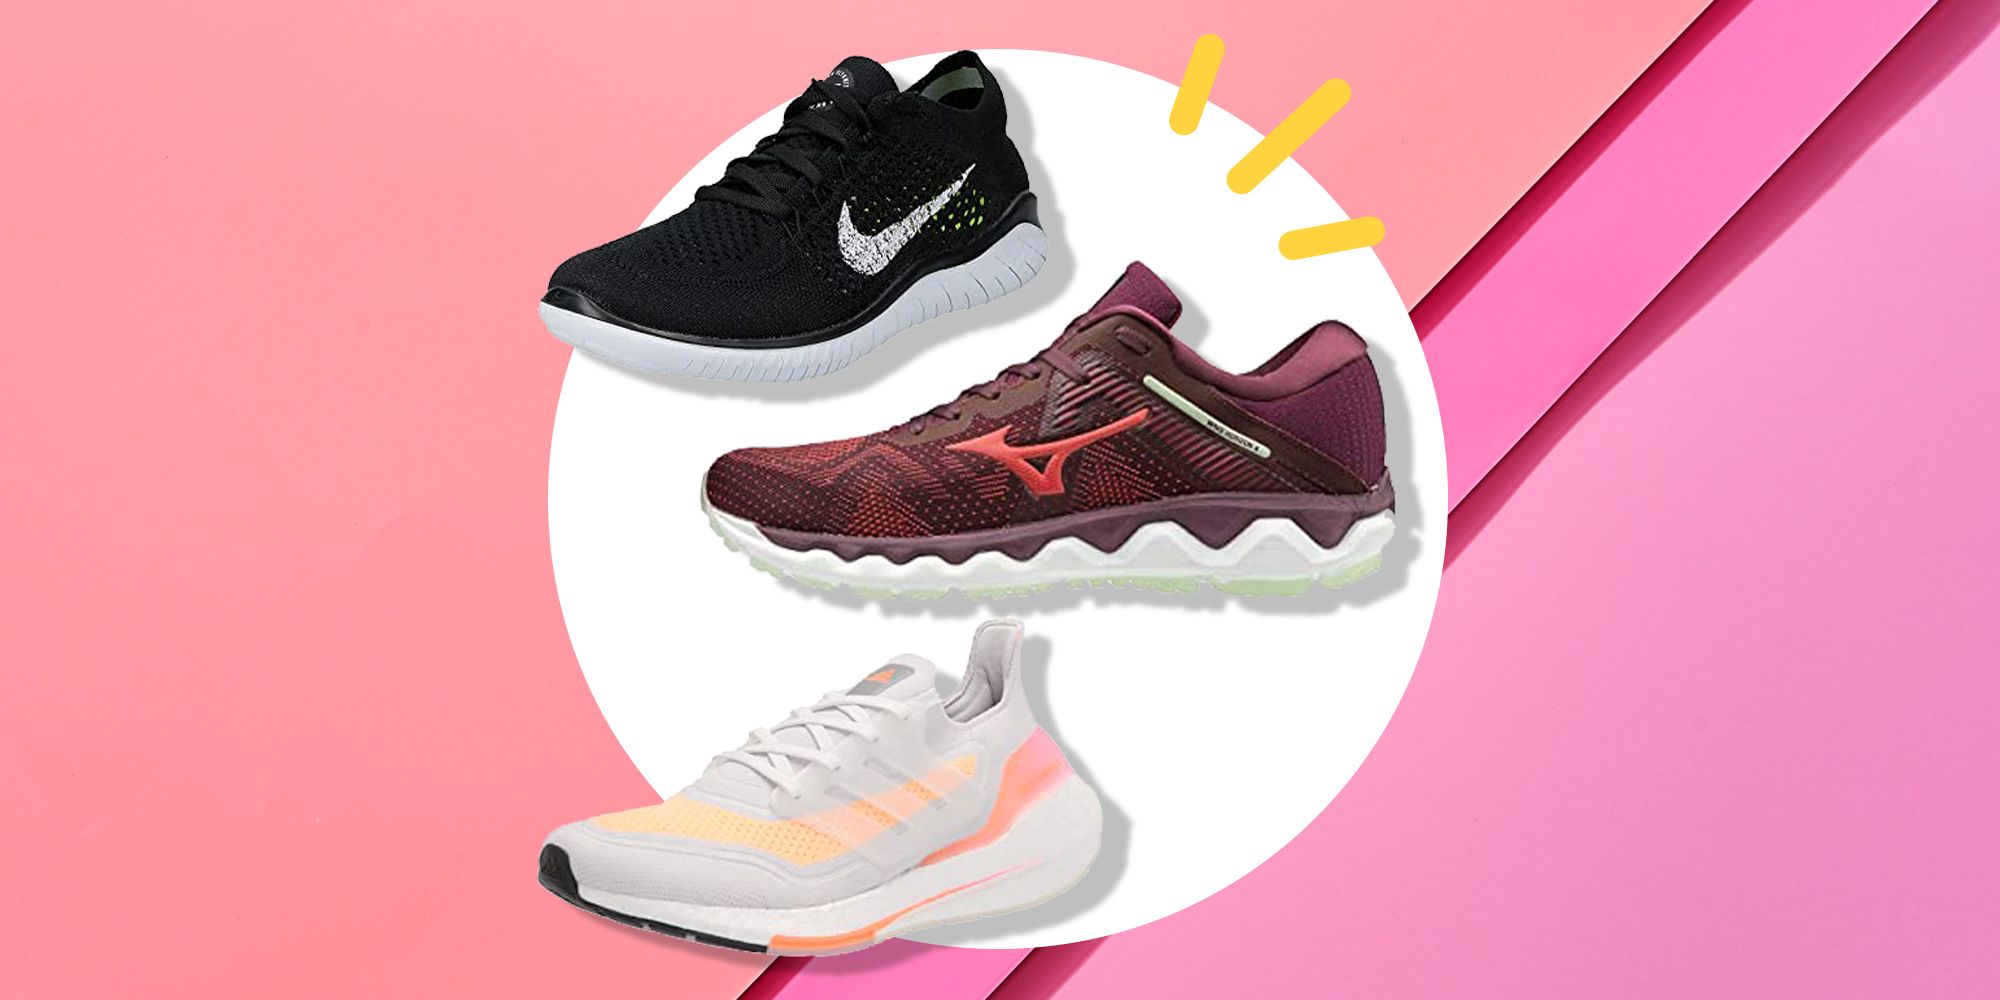 Amazon Prime Day Deals On Nike, More